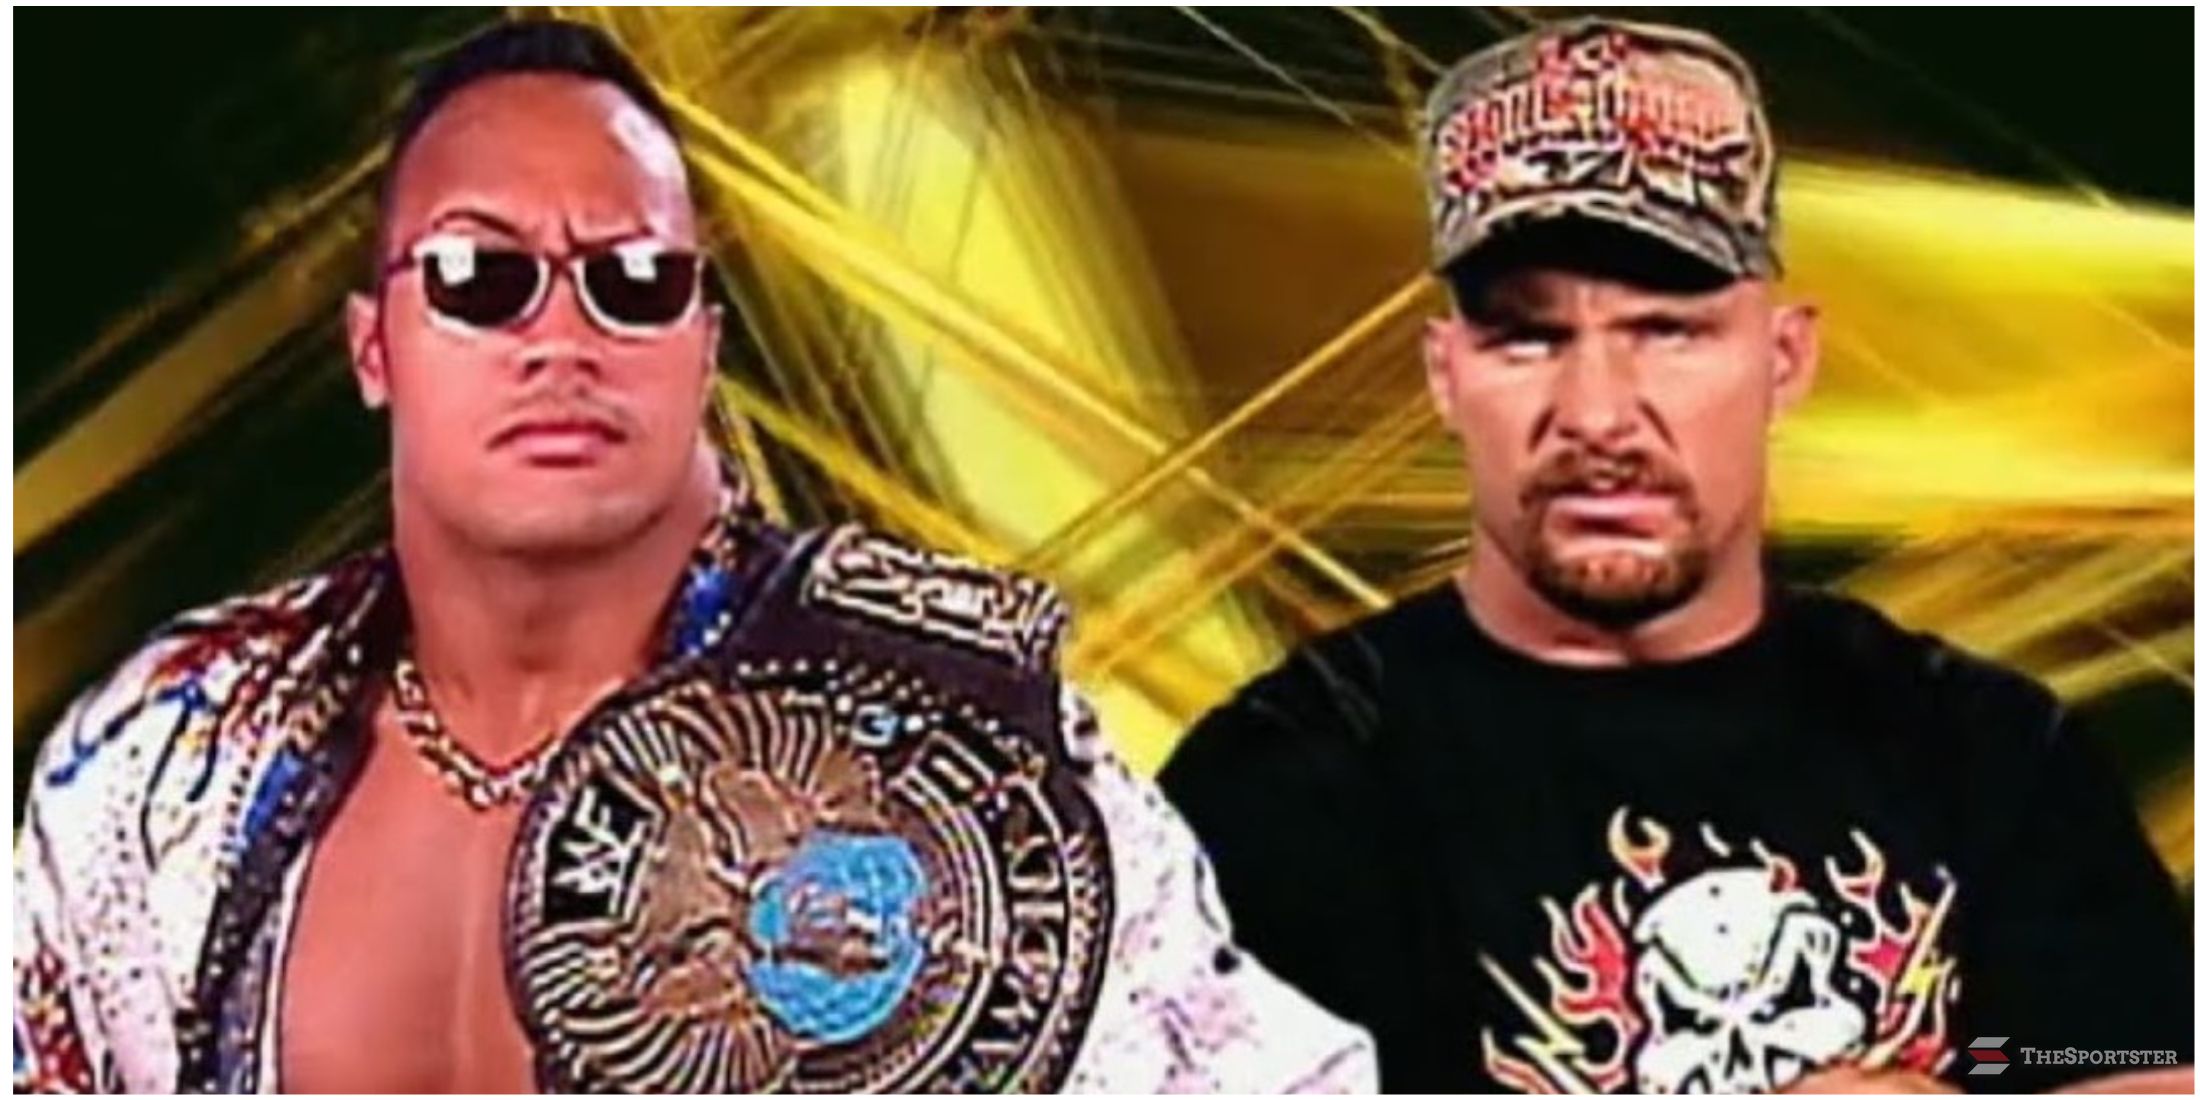 The Rock and Stone Cold Steve Austin